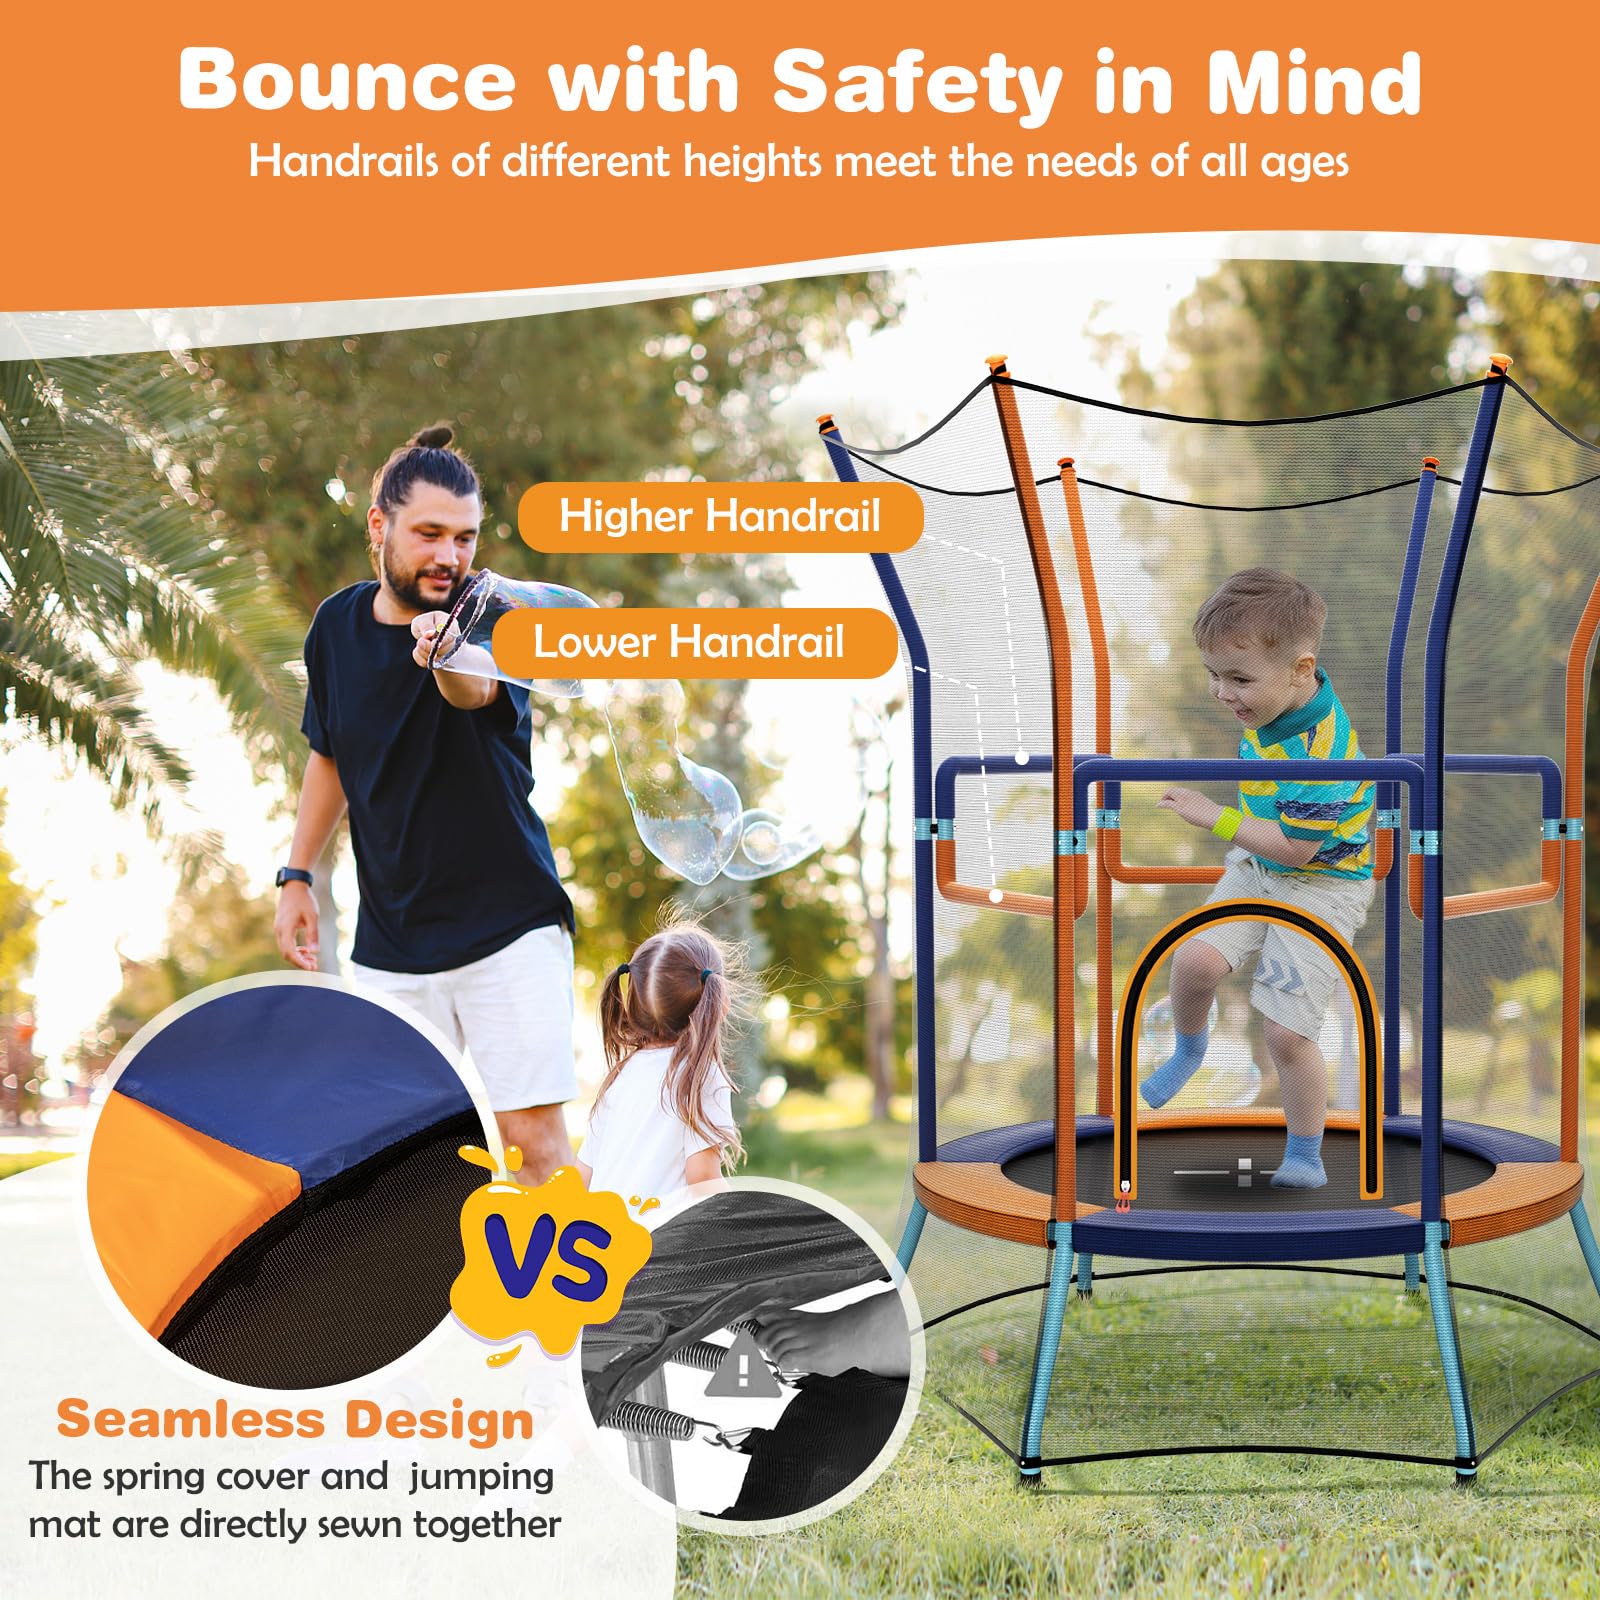 Giantex 48" Toddler Trampoline with Safety Enclosure Net